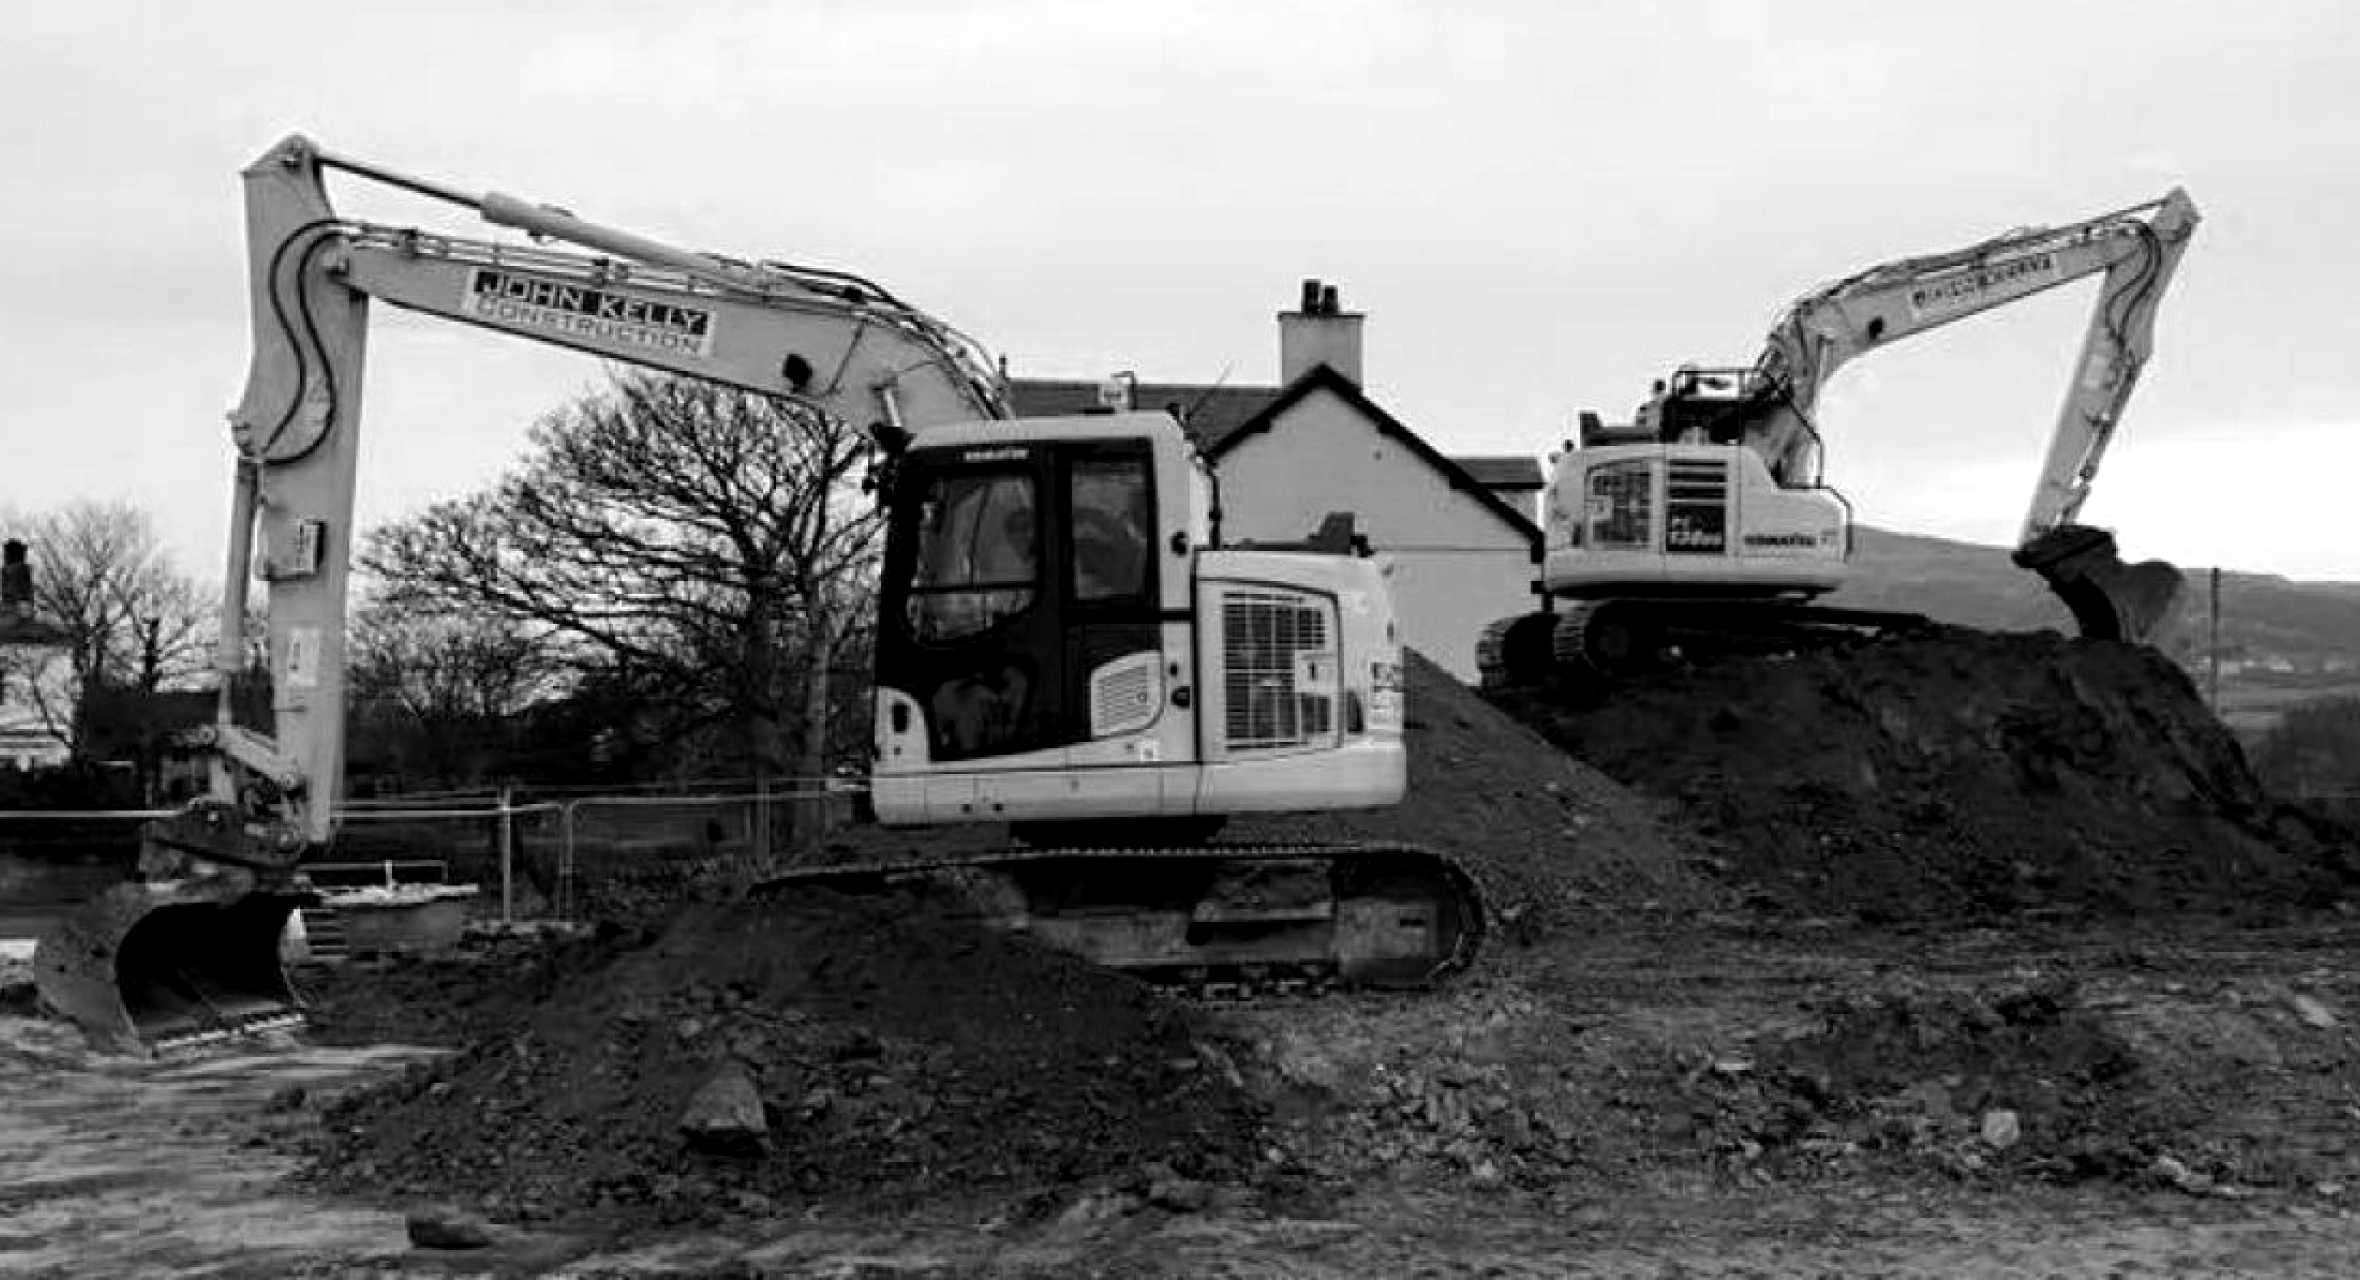 Black and white image showing diggers working on site